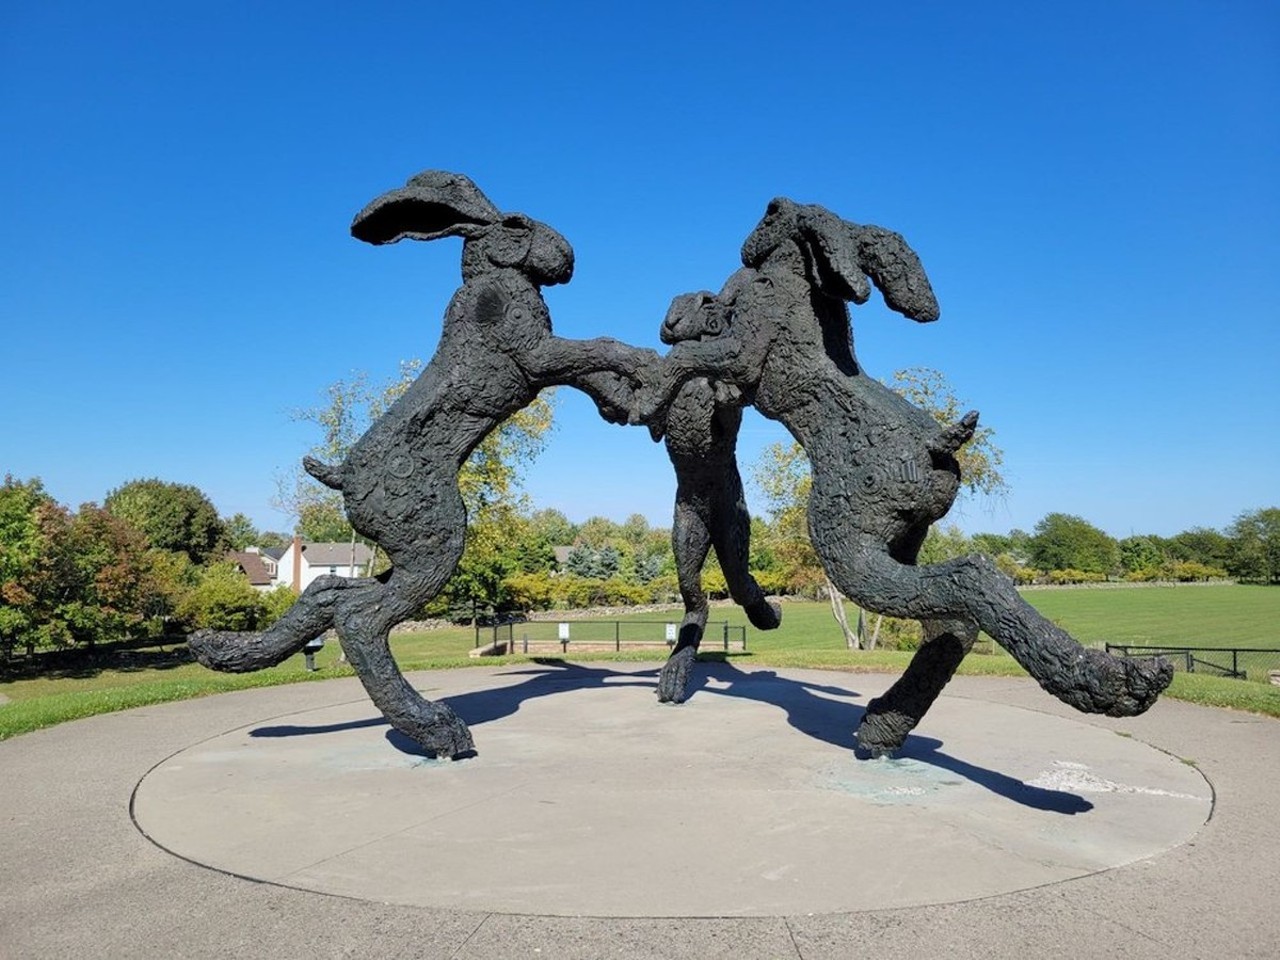 Giant Dancing Hares
6350 Woerner Temple Road, Dublin
In the Columbus suburb of Dublin, you’ll find the Ballantrae Giant Dancing Hares, which were made by English artist Sophie Ryder in 2001. The trio of rabbits is 24 feet tall.